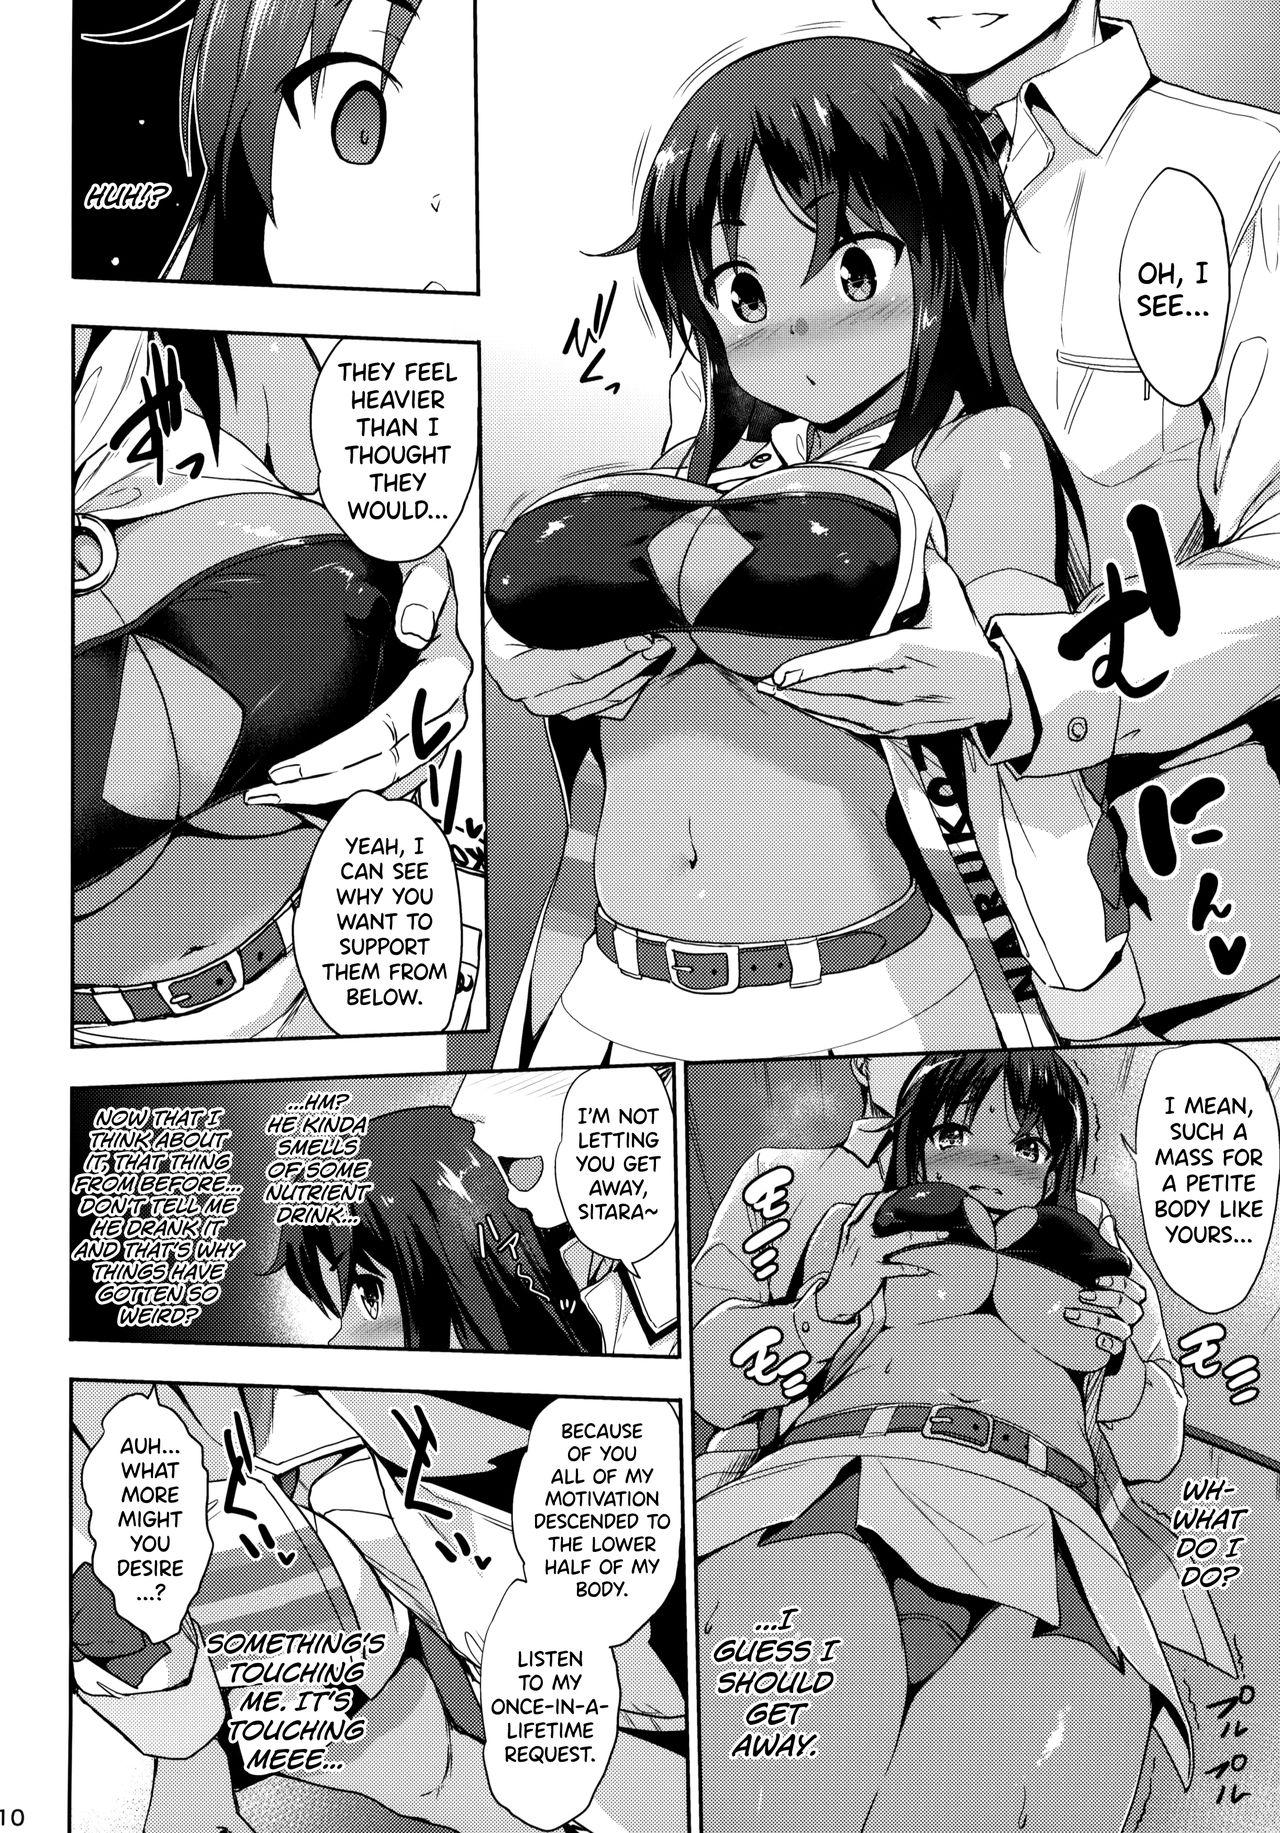 Best Blowjob Ever AUUUUUUN! - Alice gear aegis Teenfuns - Page 9